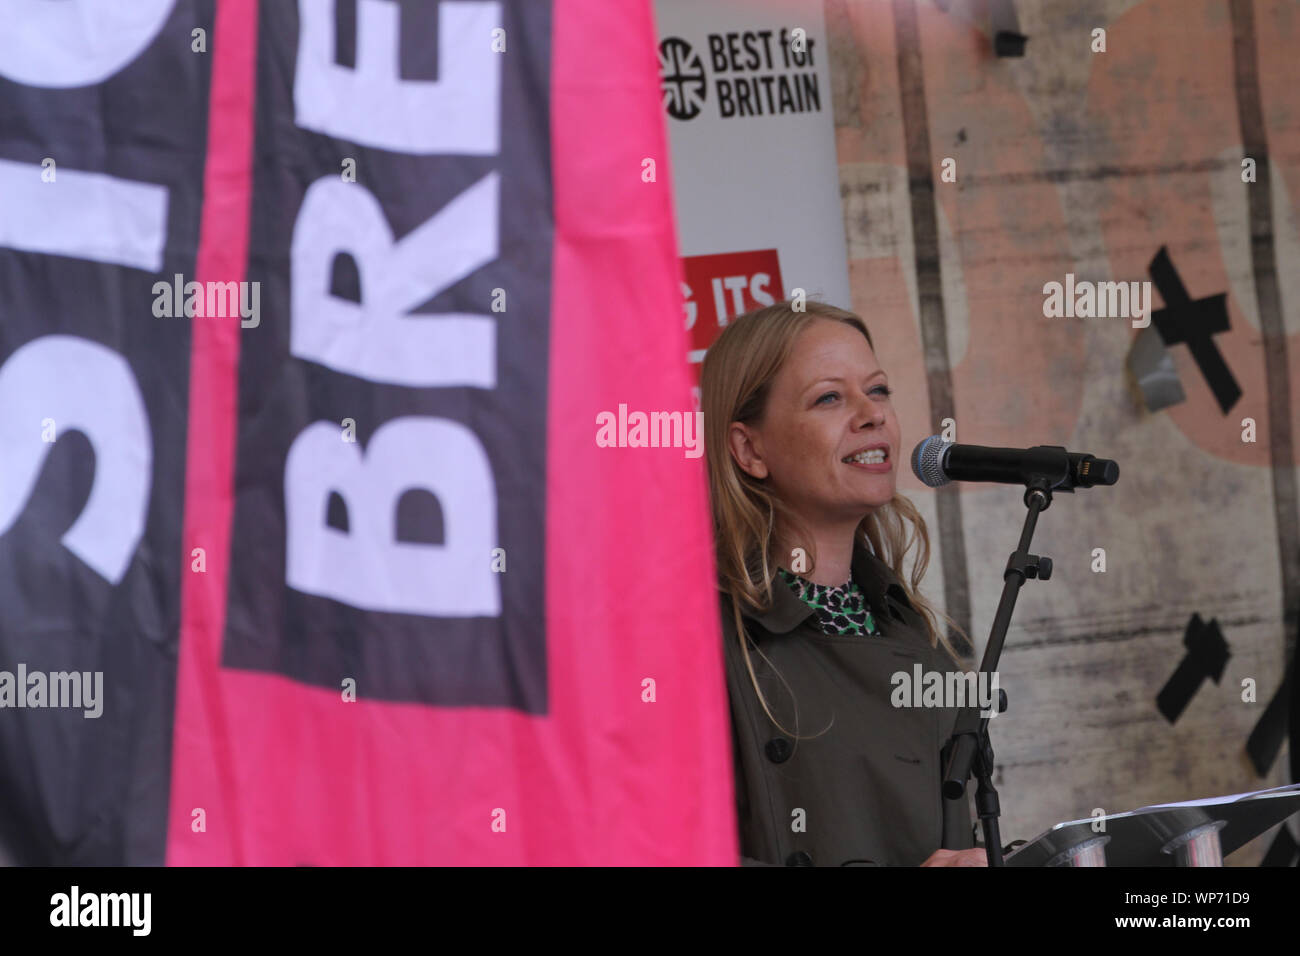 London, UK.  7 September 2019 - Sian Berry Co-leader, Green Party of England and Wales. London Assembly member,  addresses demonstrators gathered at Parliament Square for anti-Brexit rally. A couple of pro-Brexit counter-protesters attempted to disrupt the rally and provoke the anti-Brexit demonstrators by marching through the crowd holding a banner demanding the UK reverts to WTO rules.  Photos: David Mbiyu/ Alamy Live News Stock Photo